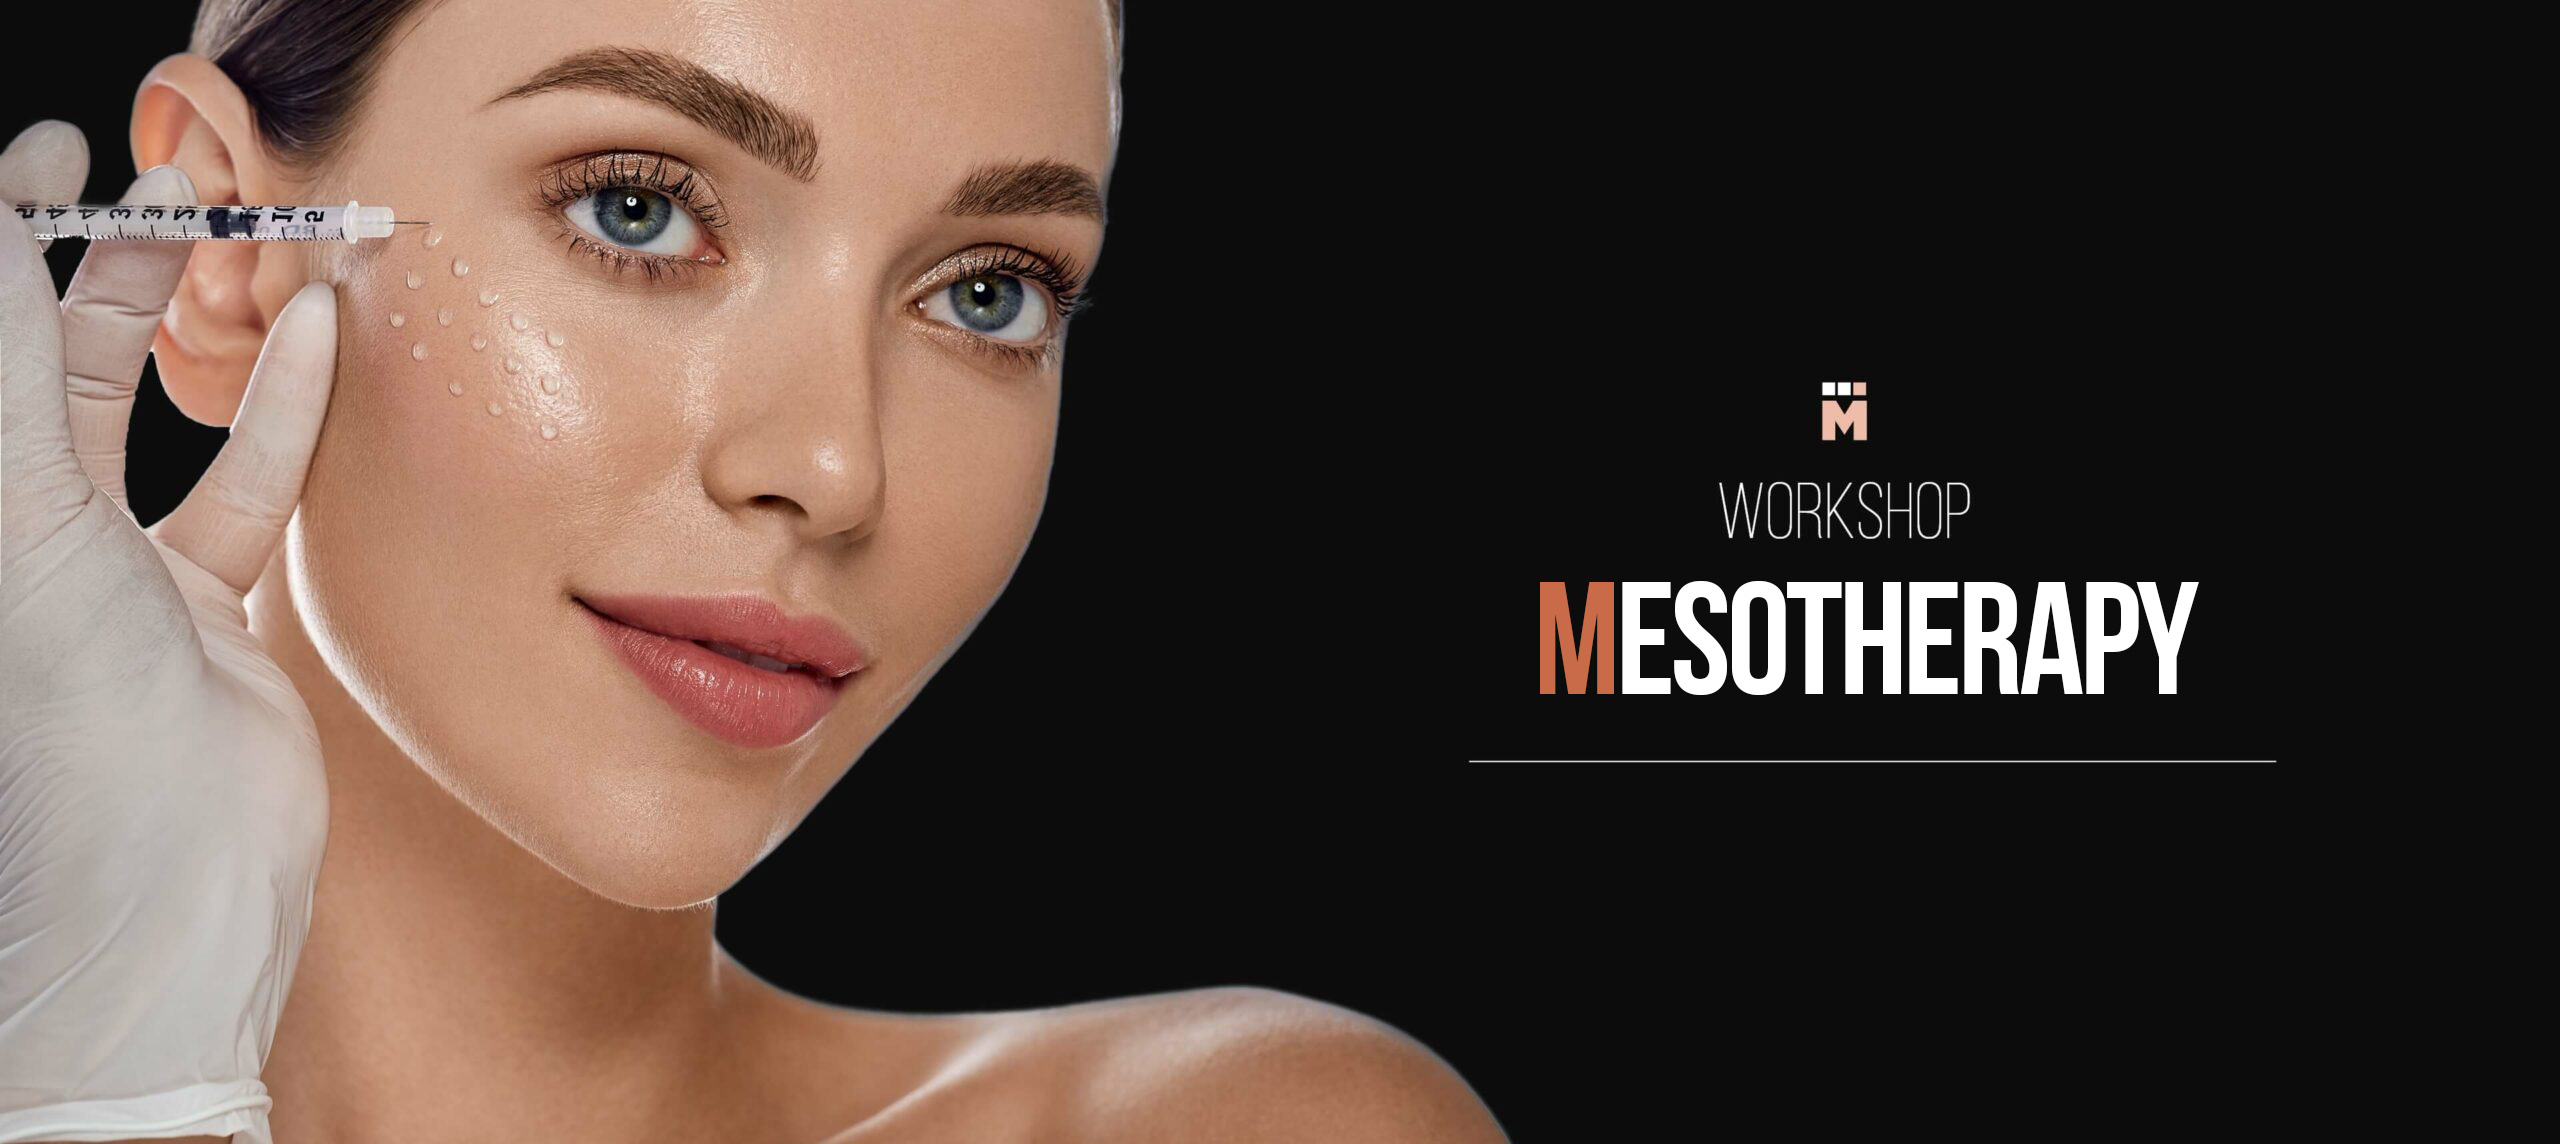 Medical-casting-agency-model-recruiting-workshop-mesotherapy